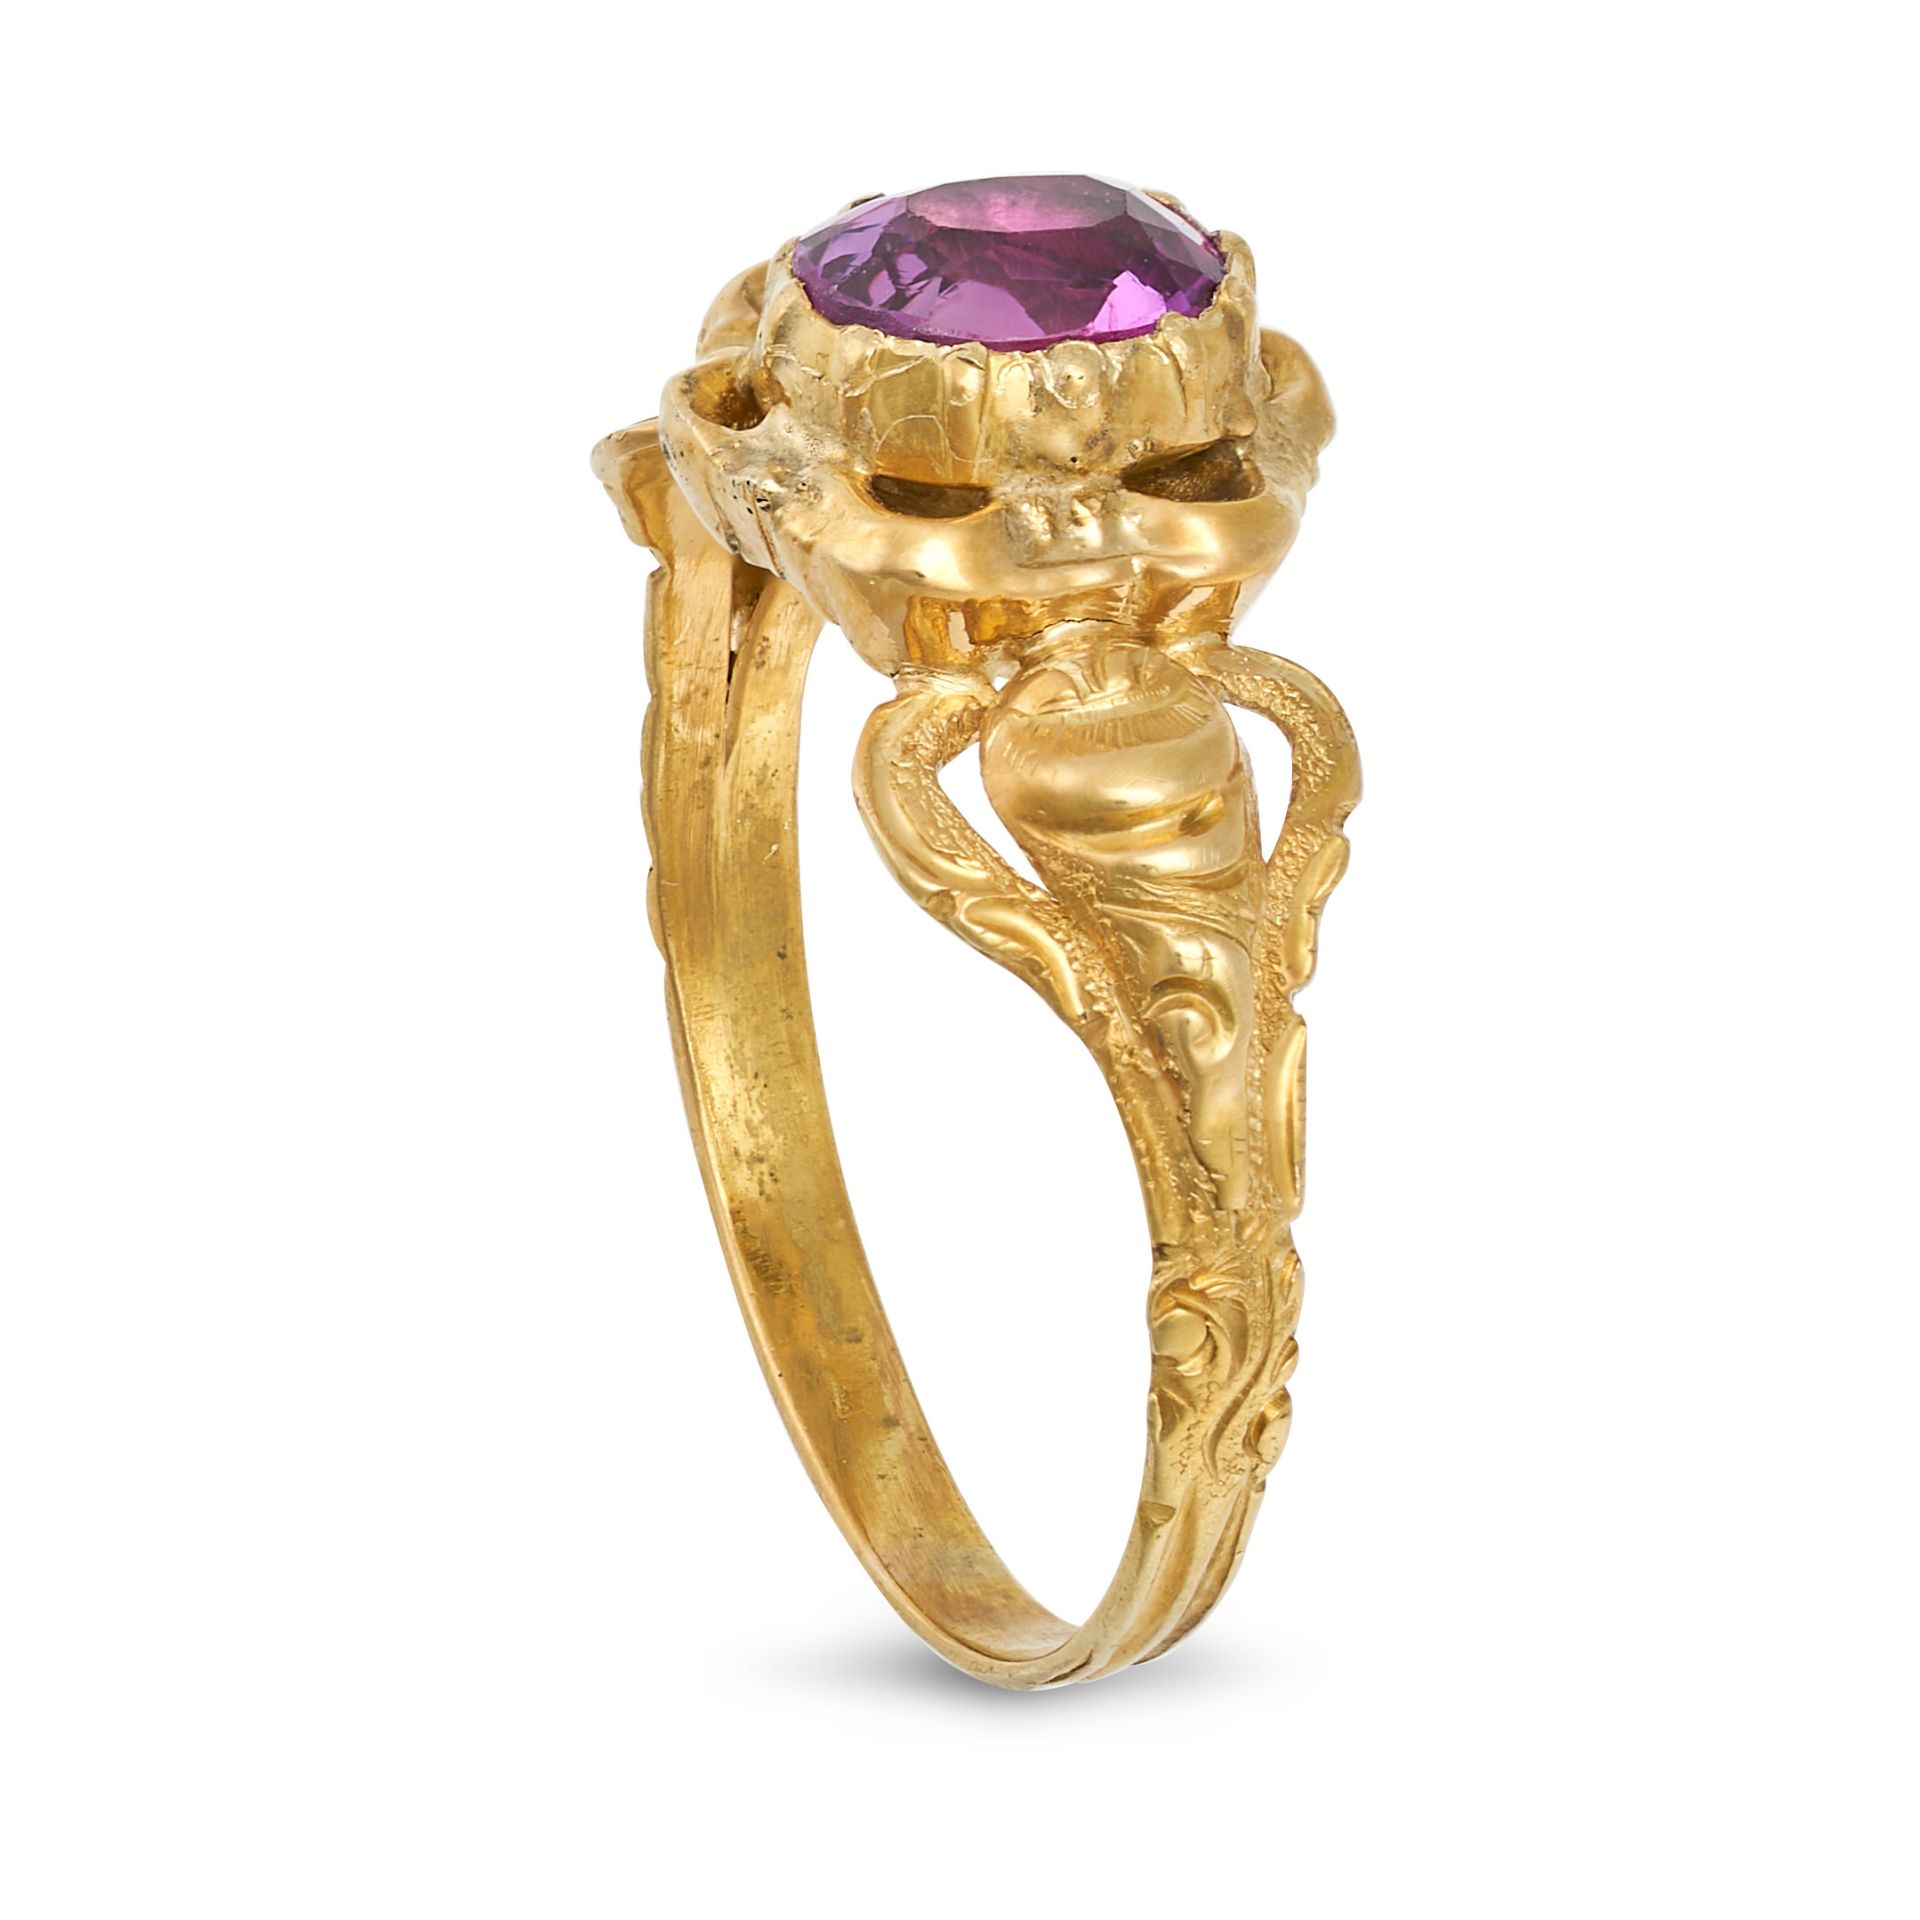 AN ANTIQUE PINK SAPPHIRE RING in yellow gold, the ornate band set with an oval cut pink sapphire,... - Image 2 of 2